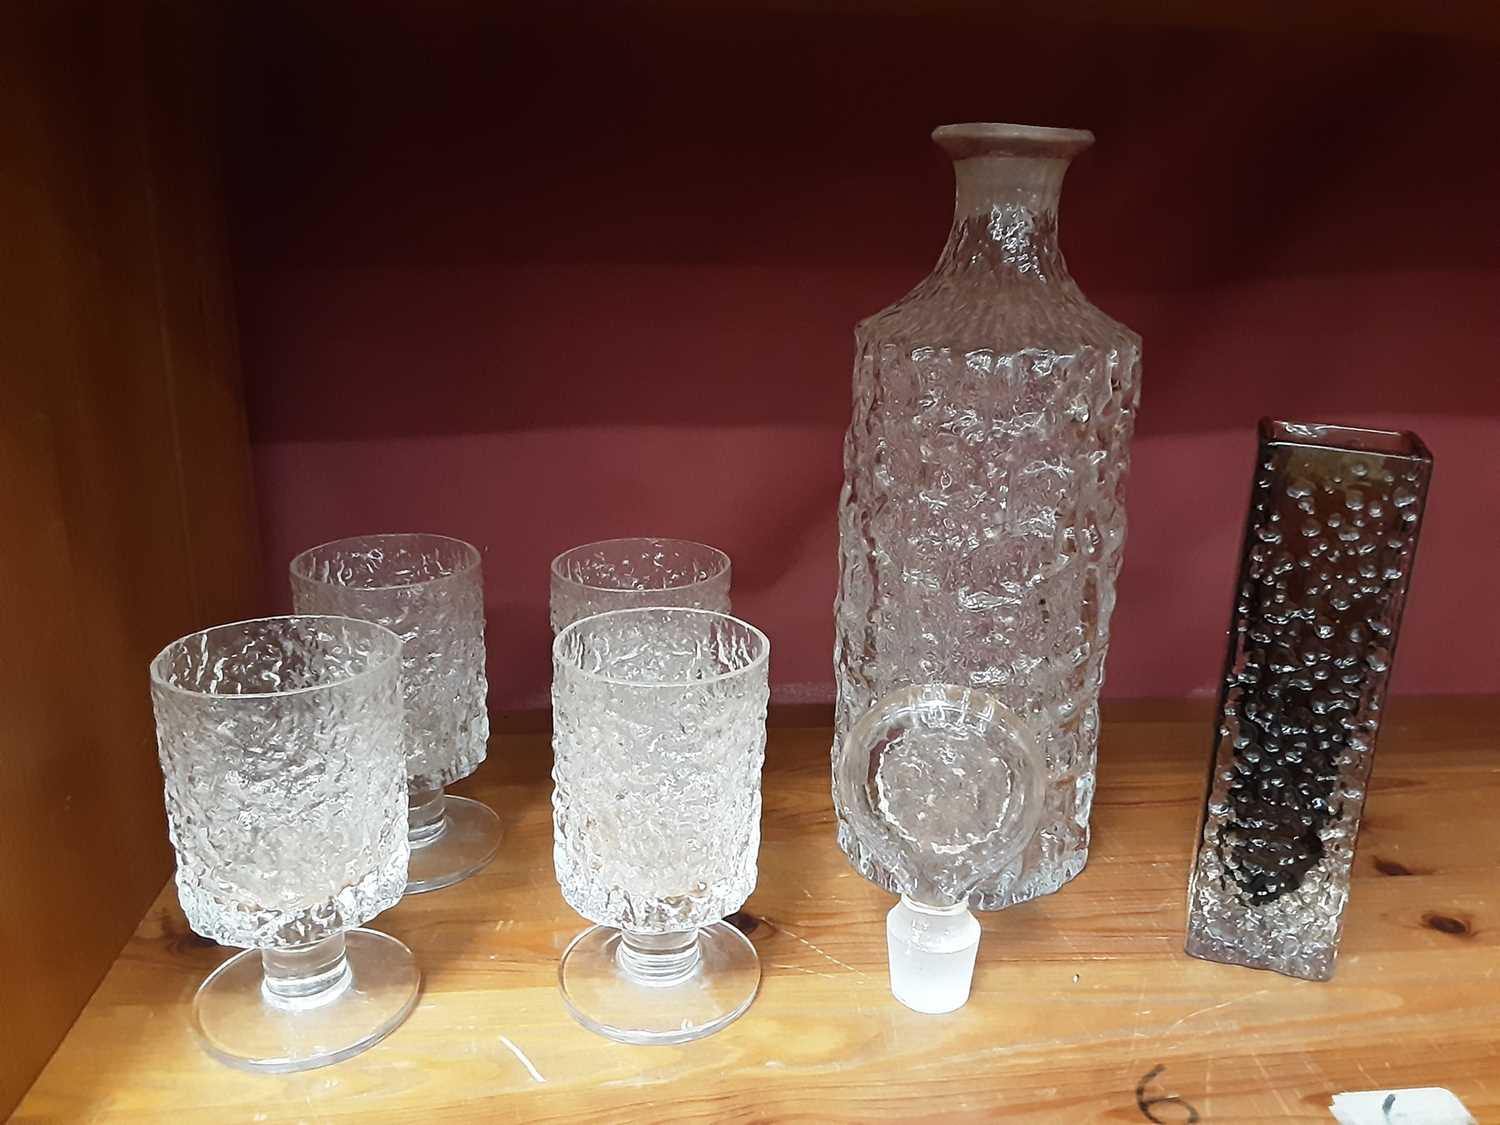 Whitefriars cinnamon nailhead vase, Whitefriars Glacier decanter and four matching glasses